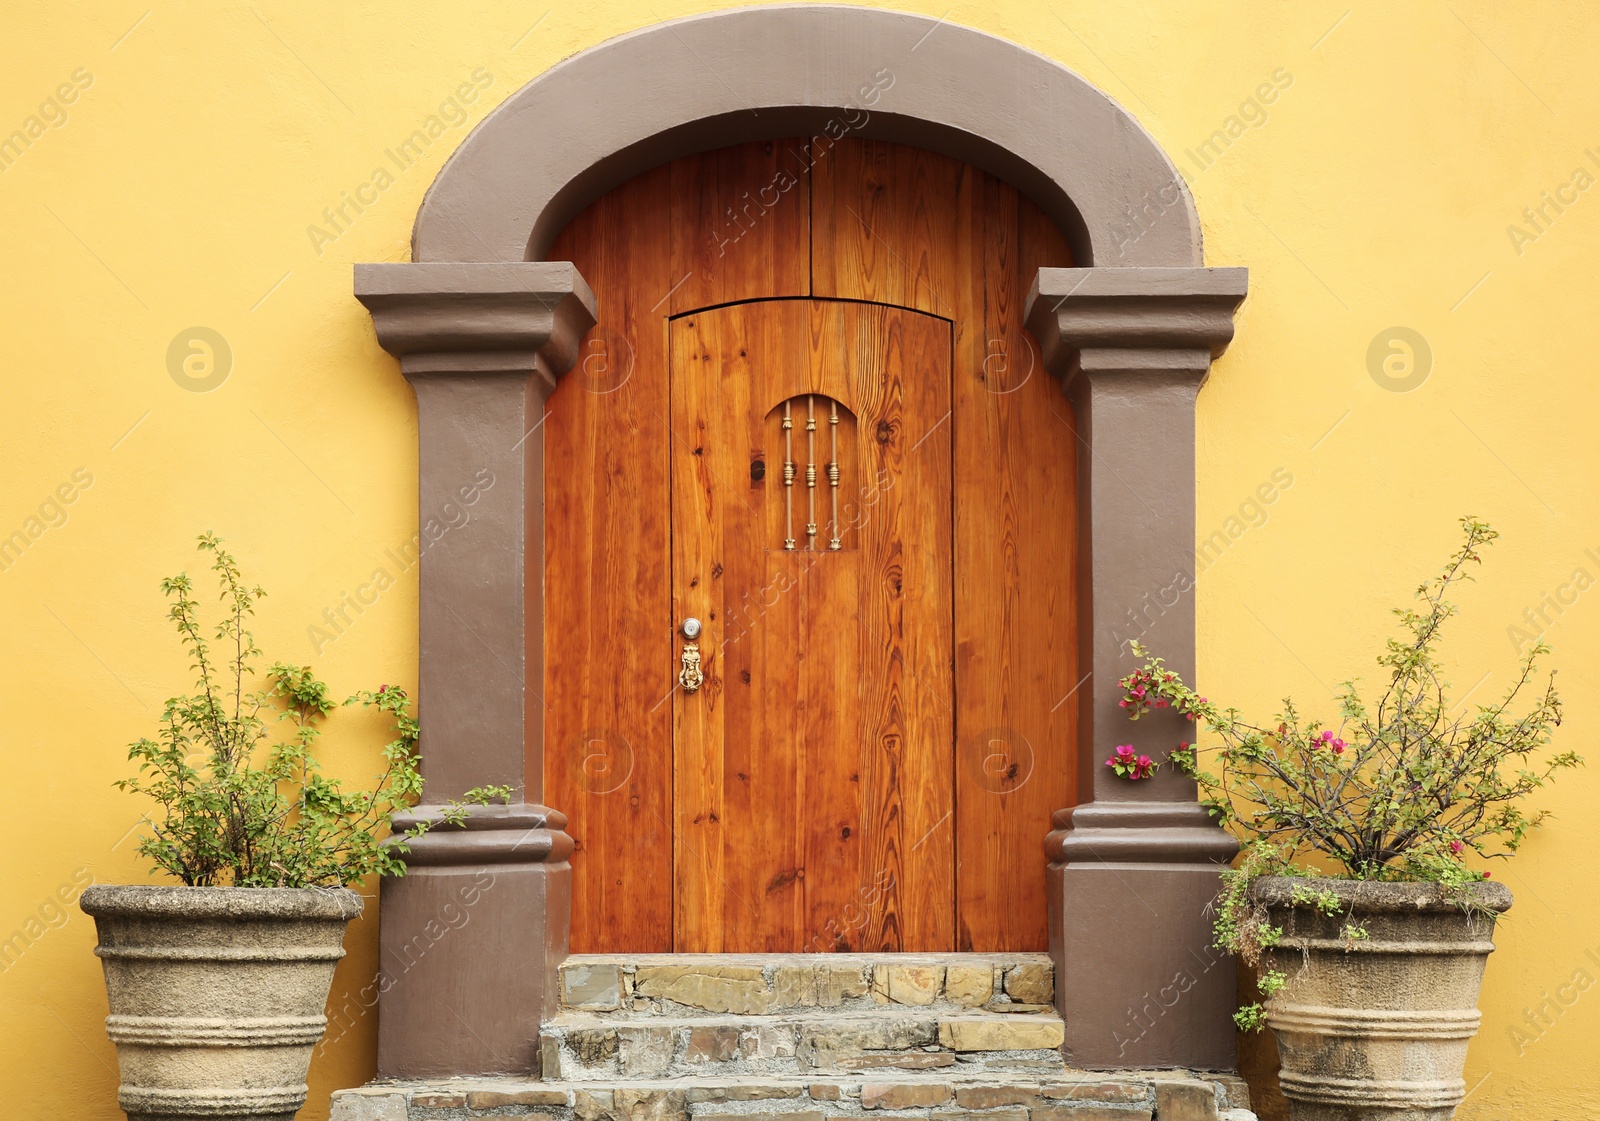 Photo of Entrance of residential house with wooden door and outdoor plants